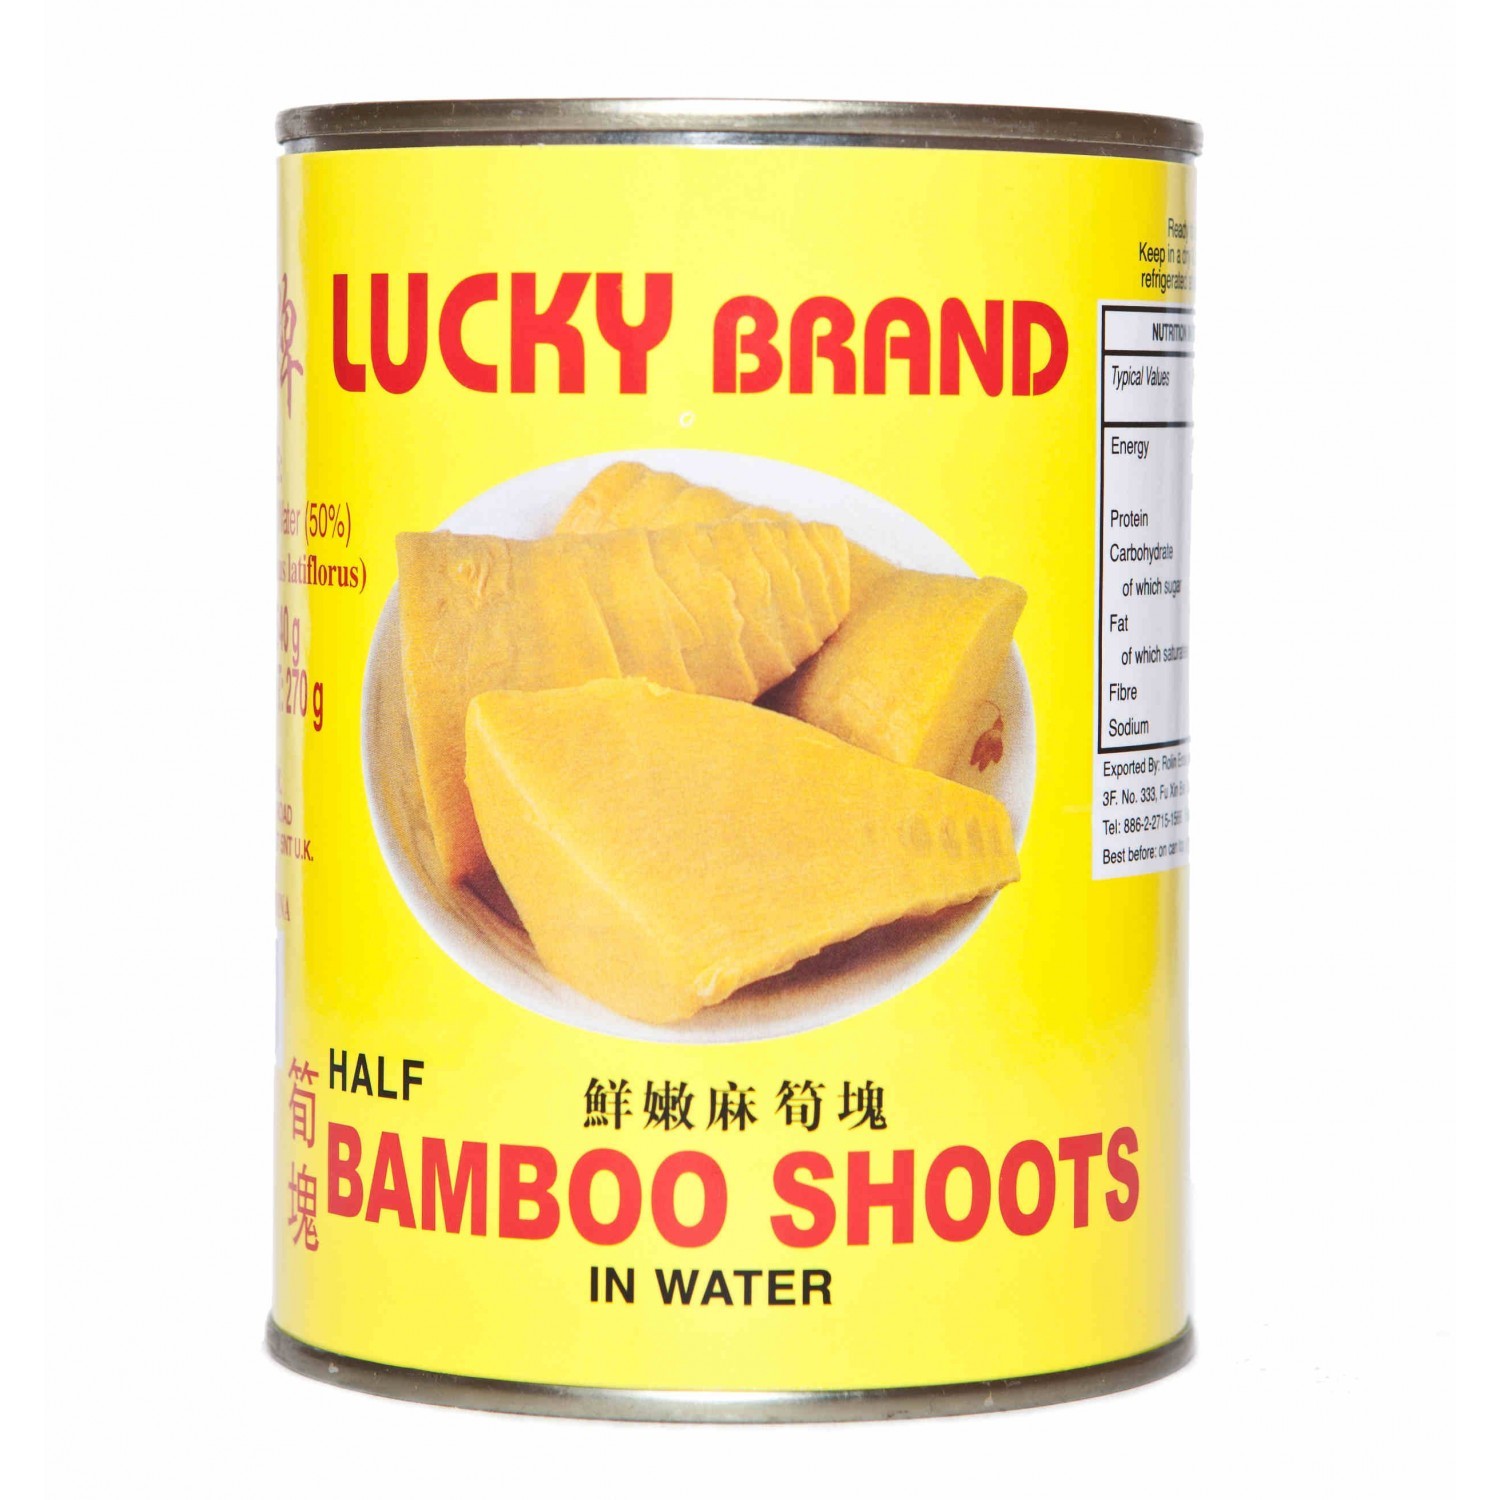 Lucky Brand - Bamboo shoots in water - Half